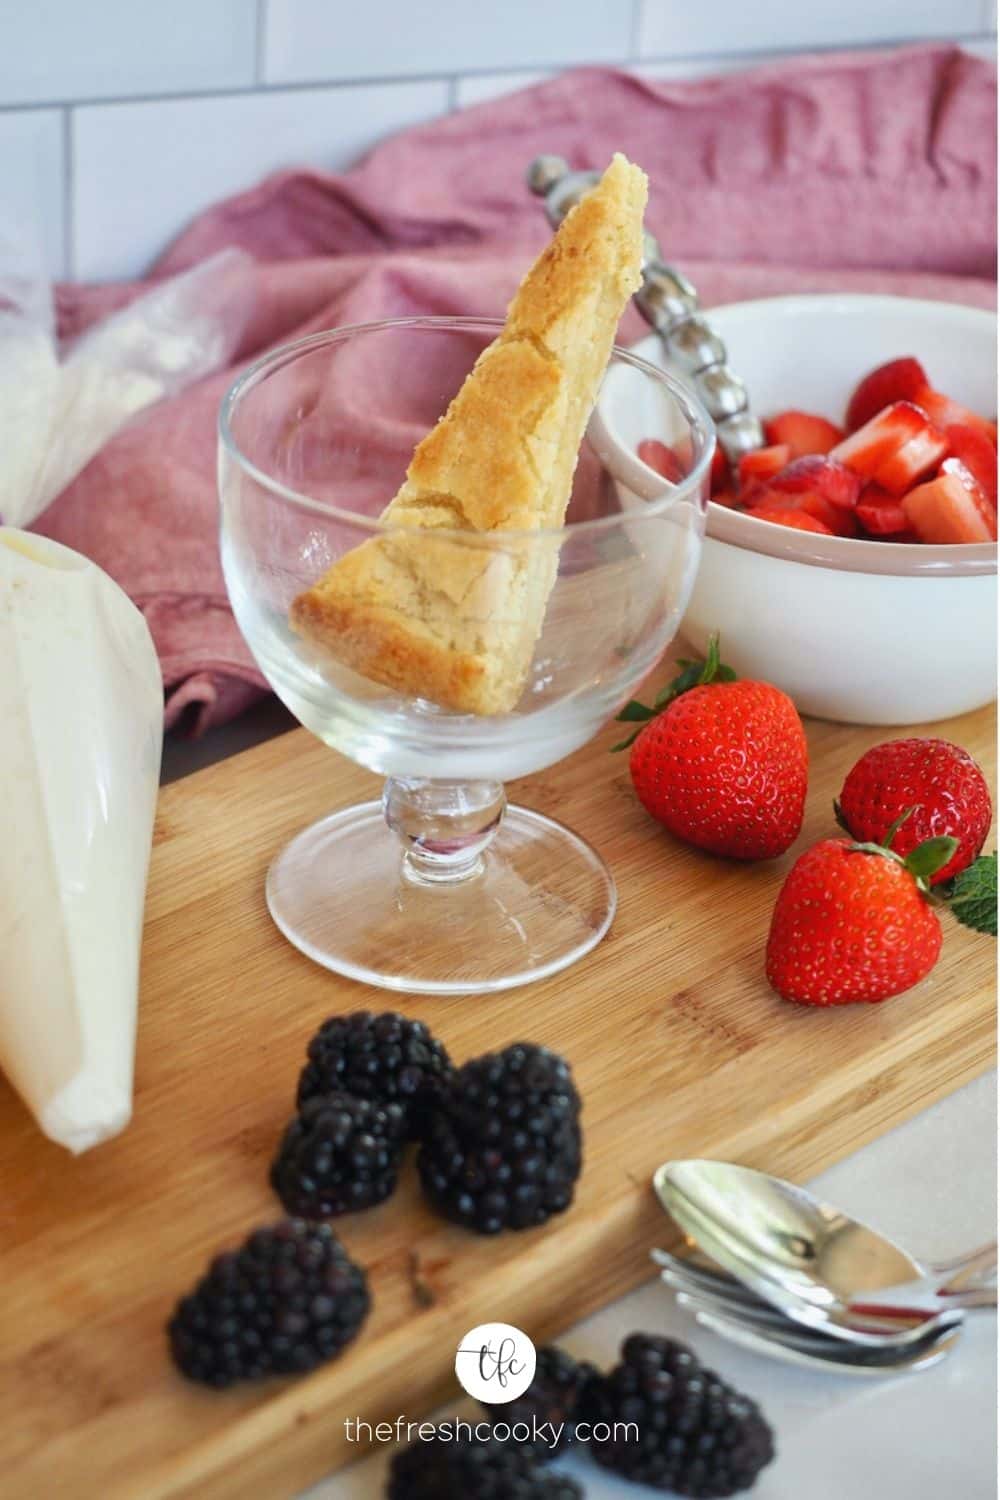 Shortcake sliced into wedge or triangle in pretty glass dish with strawberries and whipped cream ready to assemble.